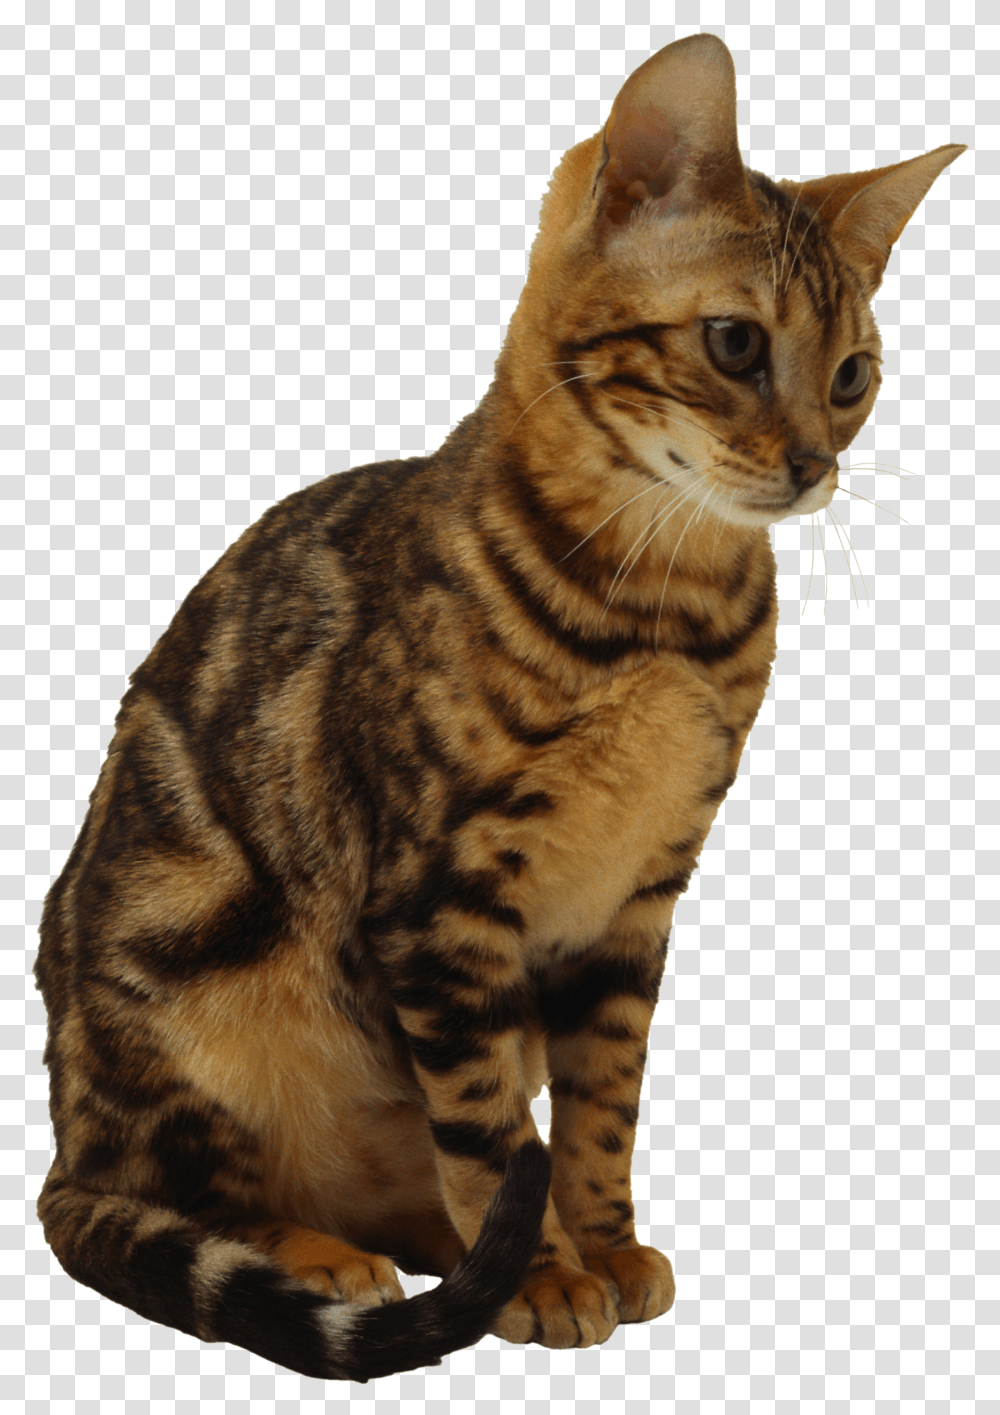 Cats Image Without Background Cat Sitting Background Transparent Png